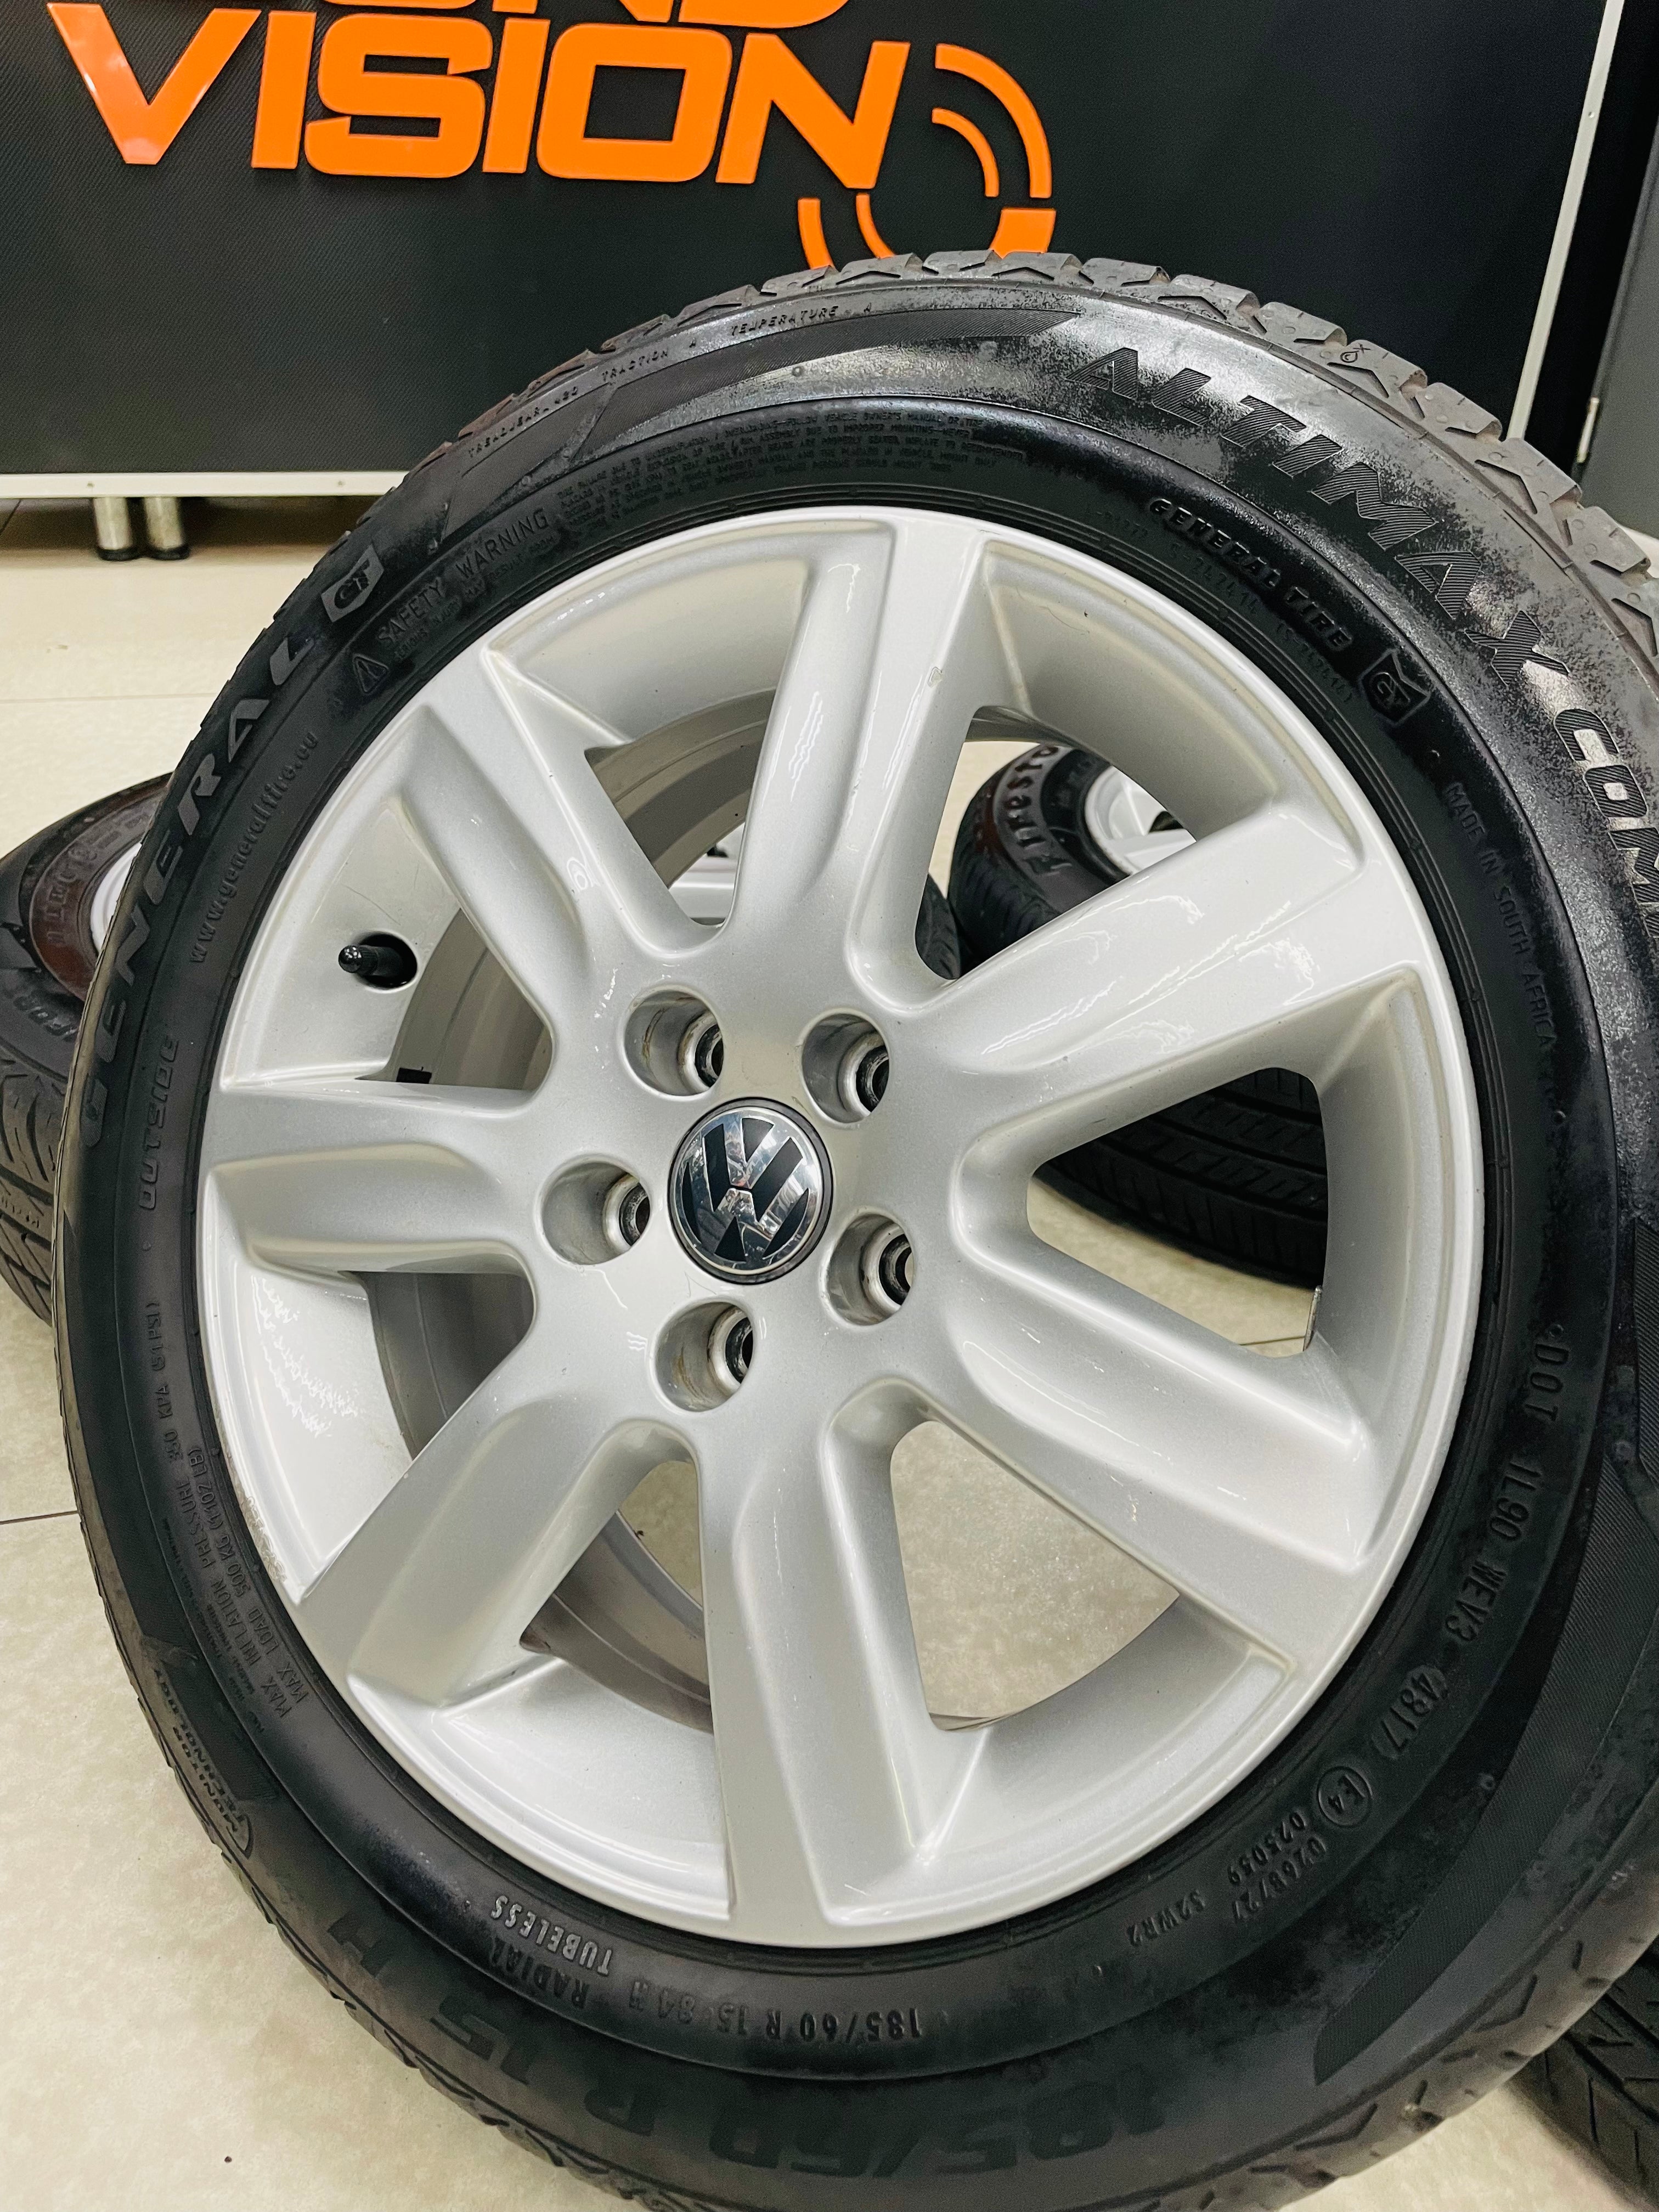 15” POLO 6r comfortline 5/100 pre owned mags & tyres